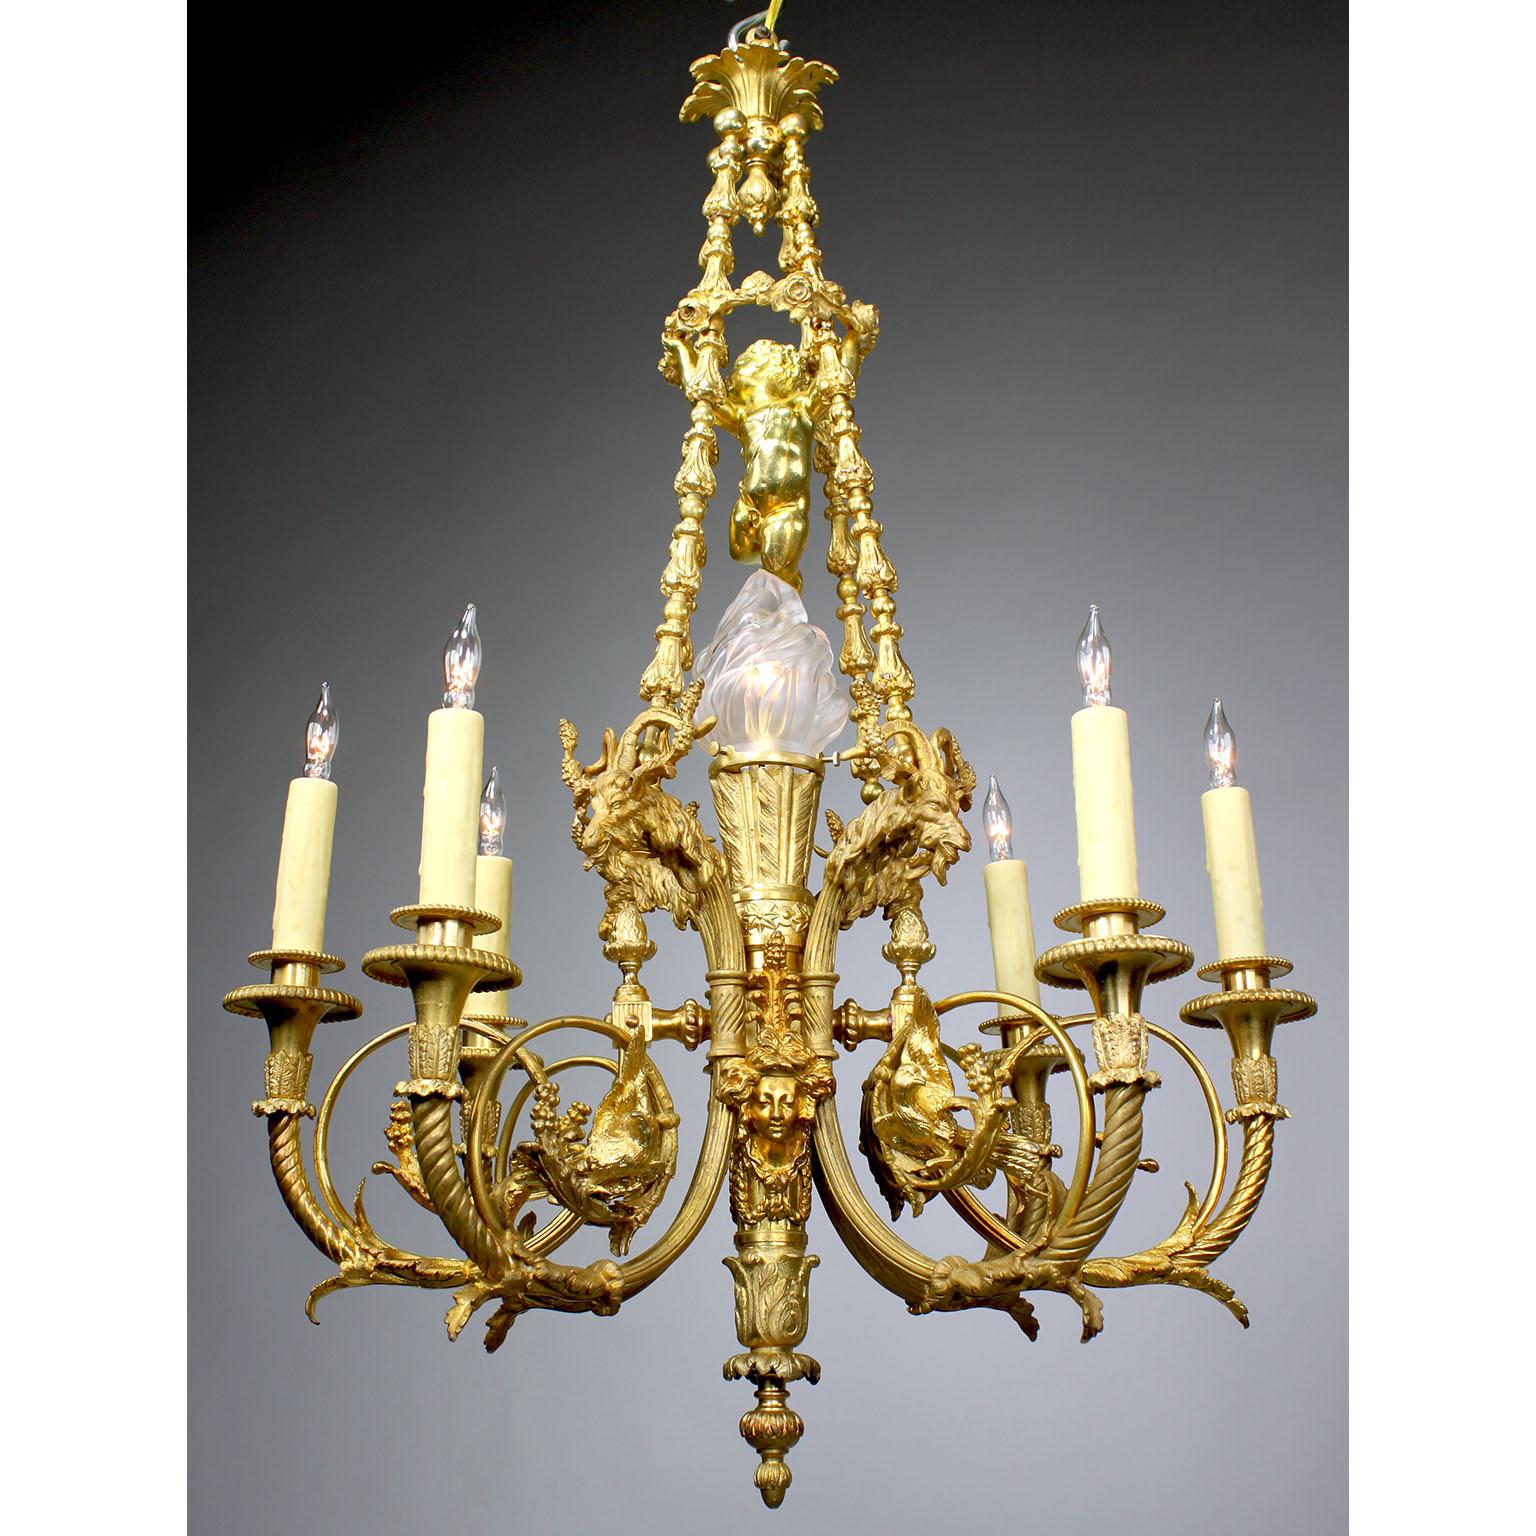 A fine French 19th Century Louis XV Style gilt bronze seven-light figural chandelier. The elongated and ovoid gilt-bronze frame with six scrolled candle-arms (now electrified) surmounted with doves, ram-heads, vines, rosettes, fruits and tassels,